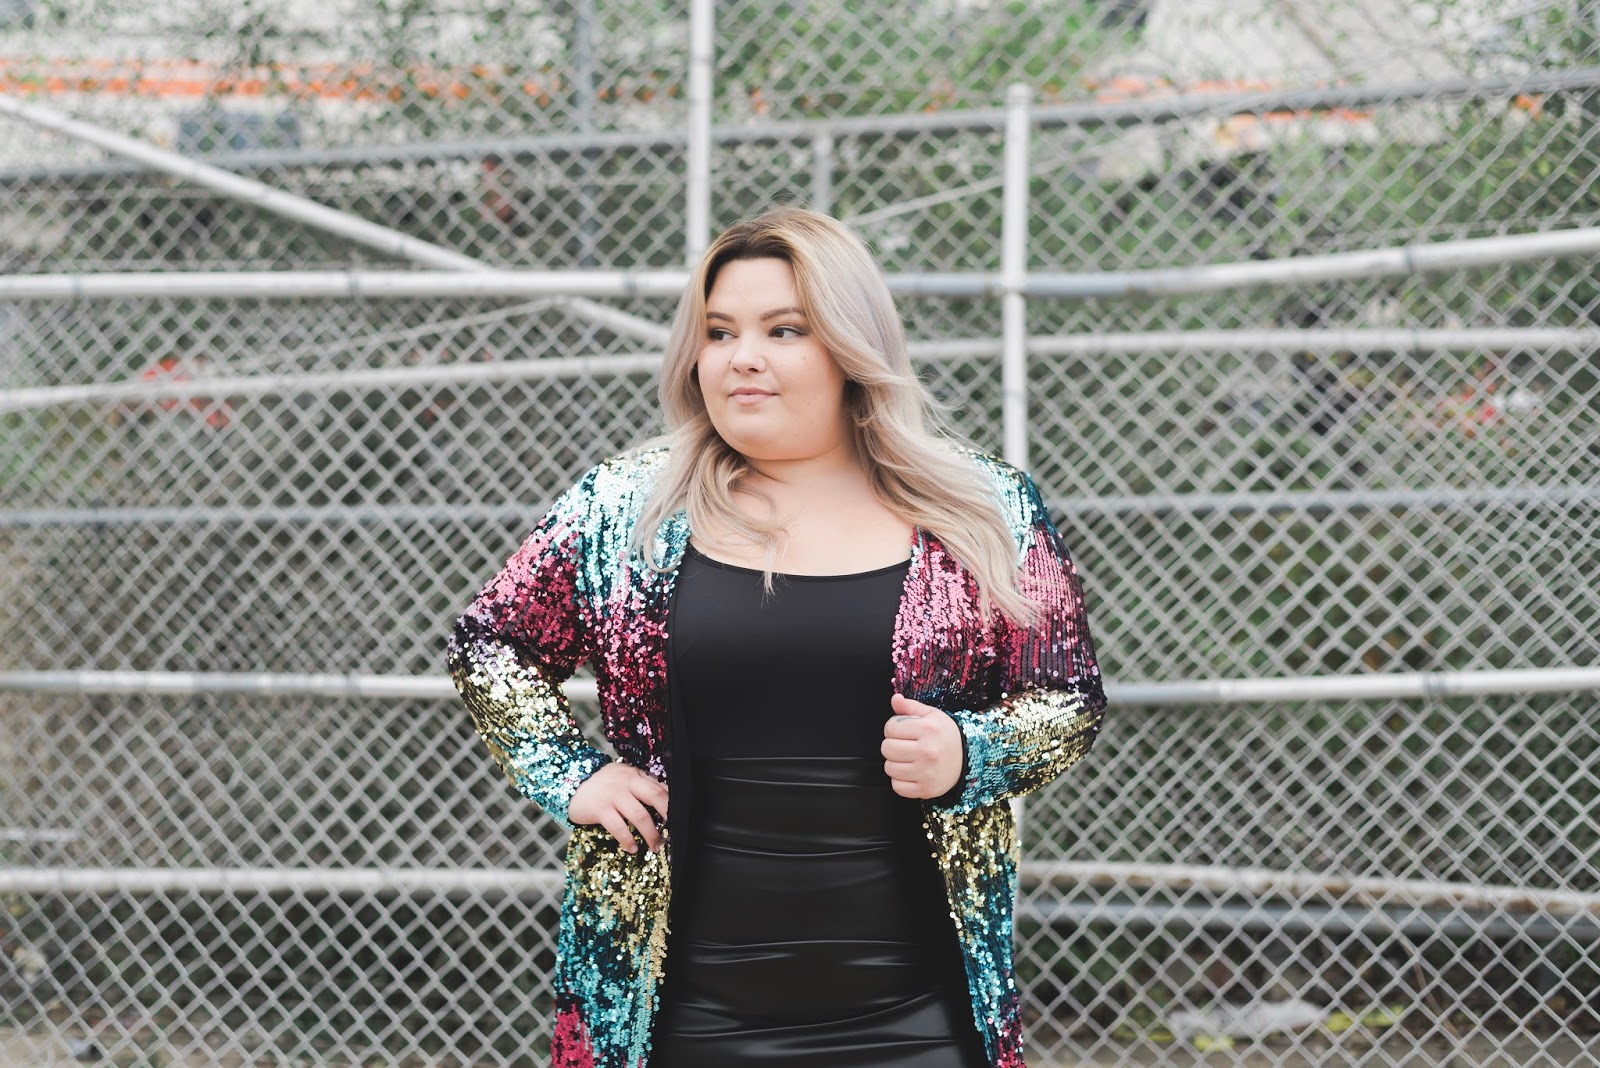 natalie Craig, natalie in the city, Chicago plus size fashion blogger, Chicago plus size model, sequin blazer, plus size sequins, wedge sneakers, inavie boutique, affordable plus size fashion, sequins fall 2017, how to wear sequins, plus model magazine, midwest blogger, Chicago fashion, rainbow sequins, curves and confidence